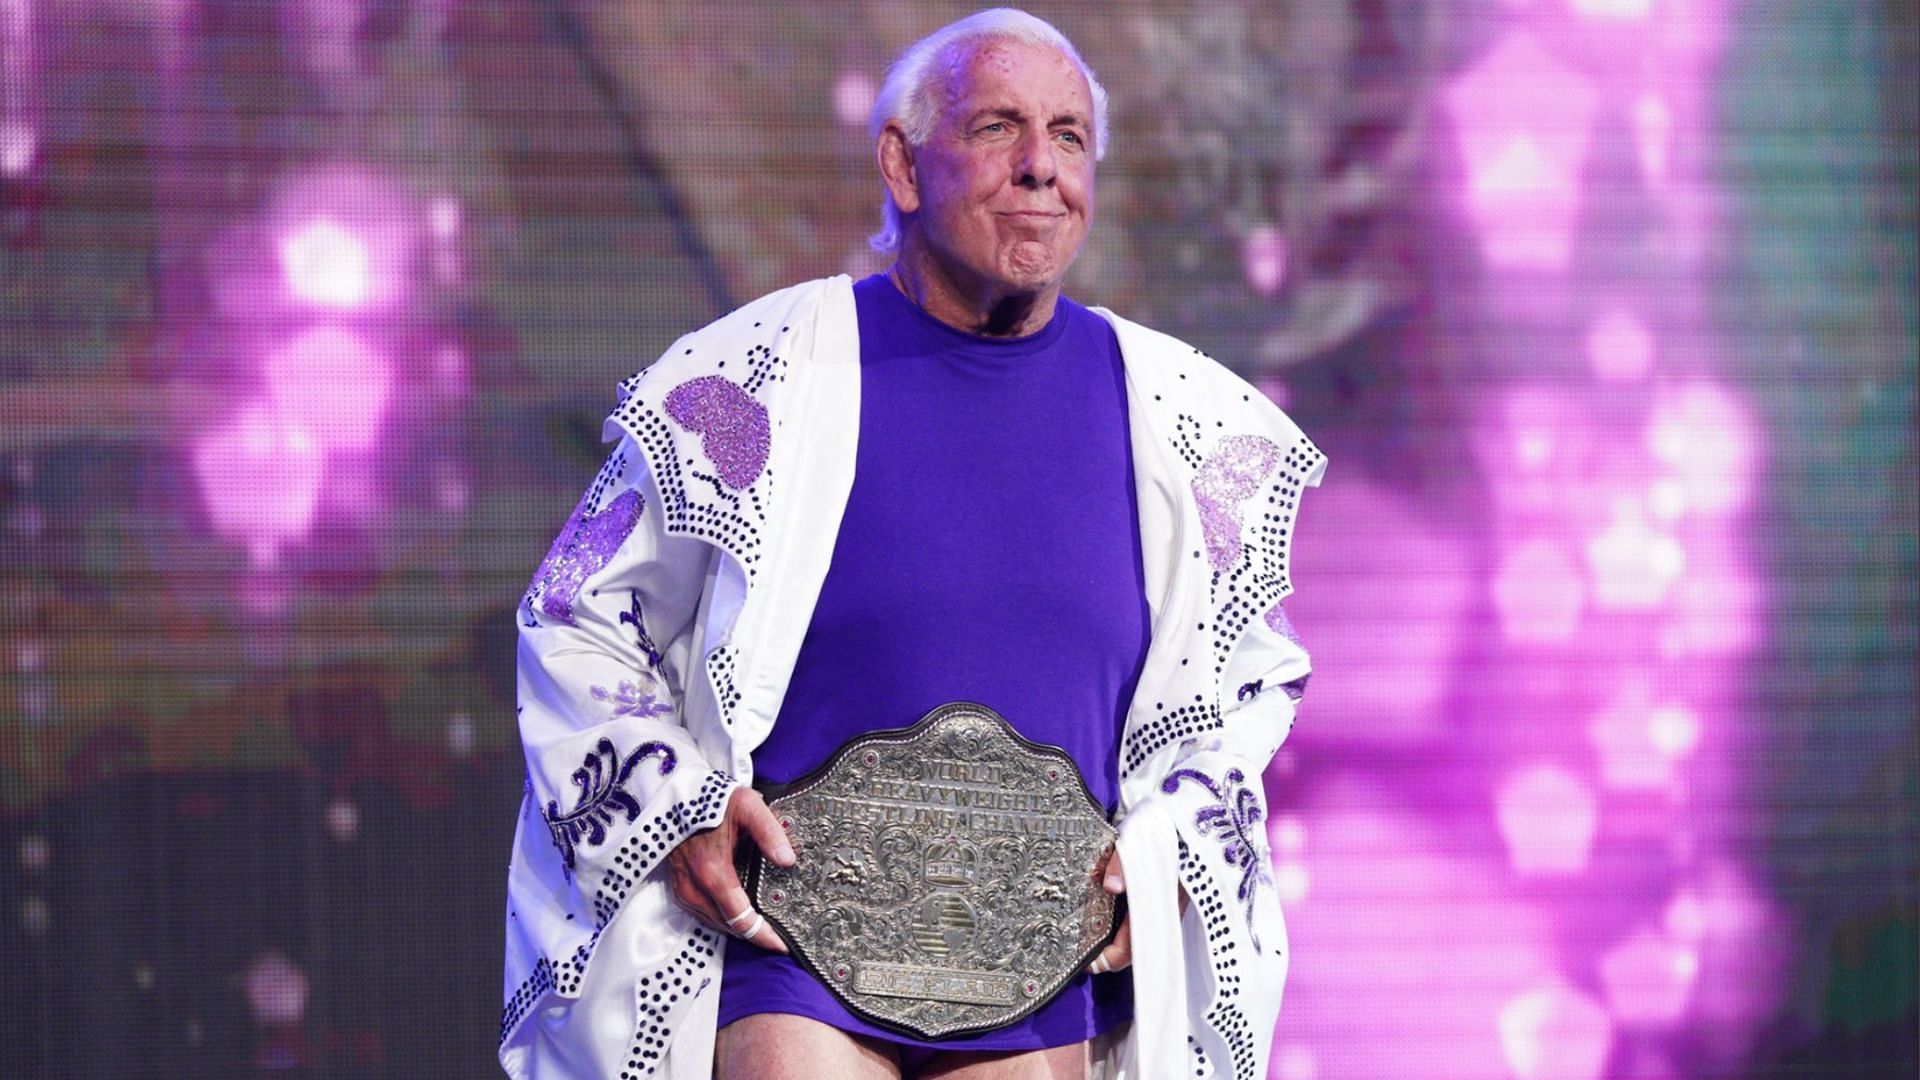 Ric Flair&#039;s Last Match event aired last Sunday